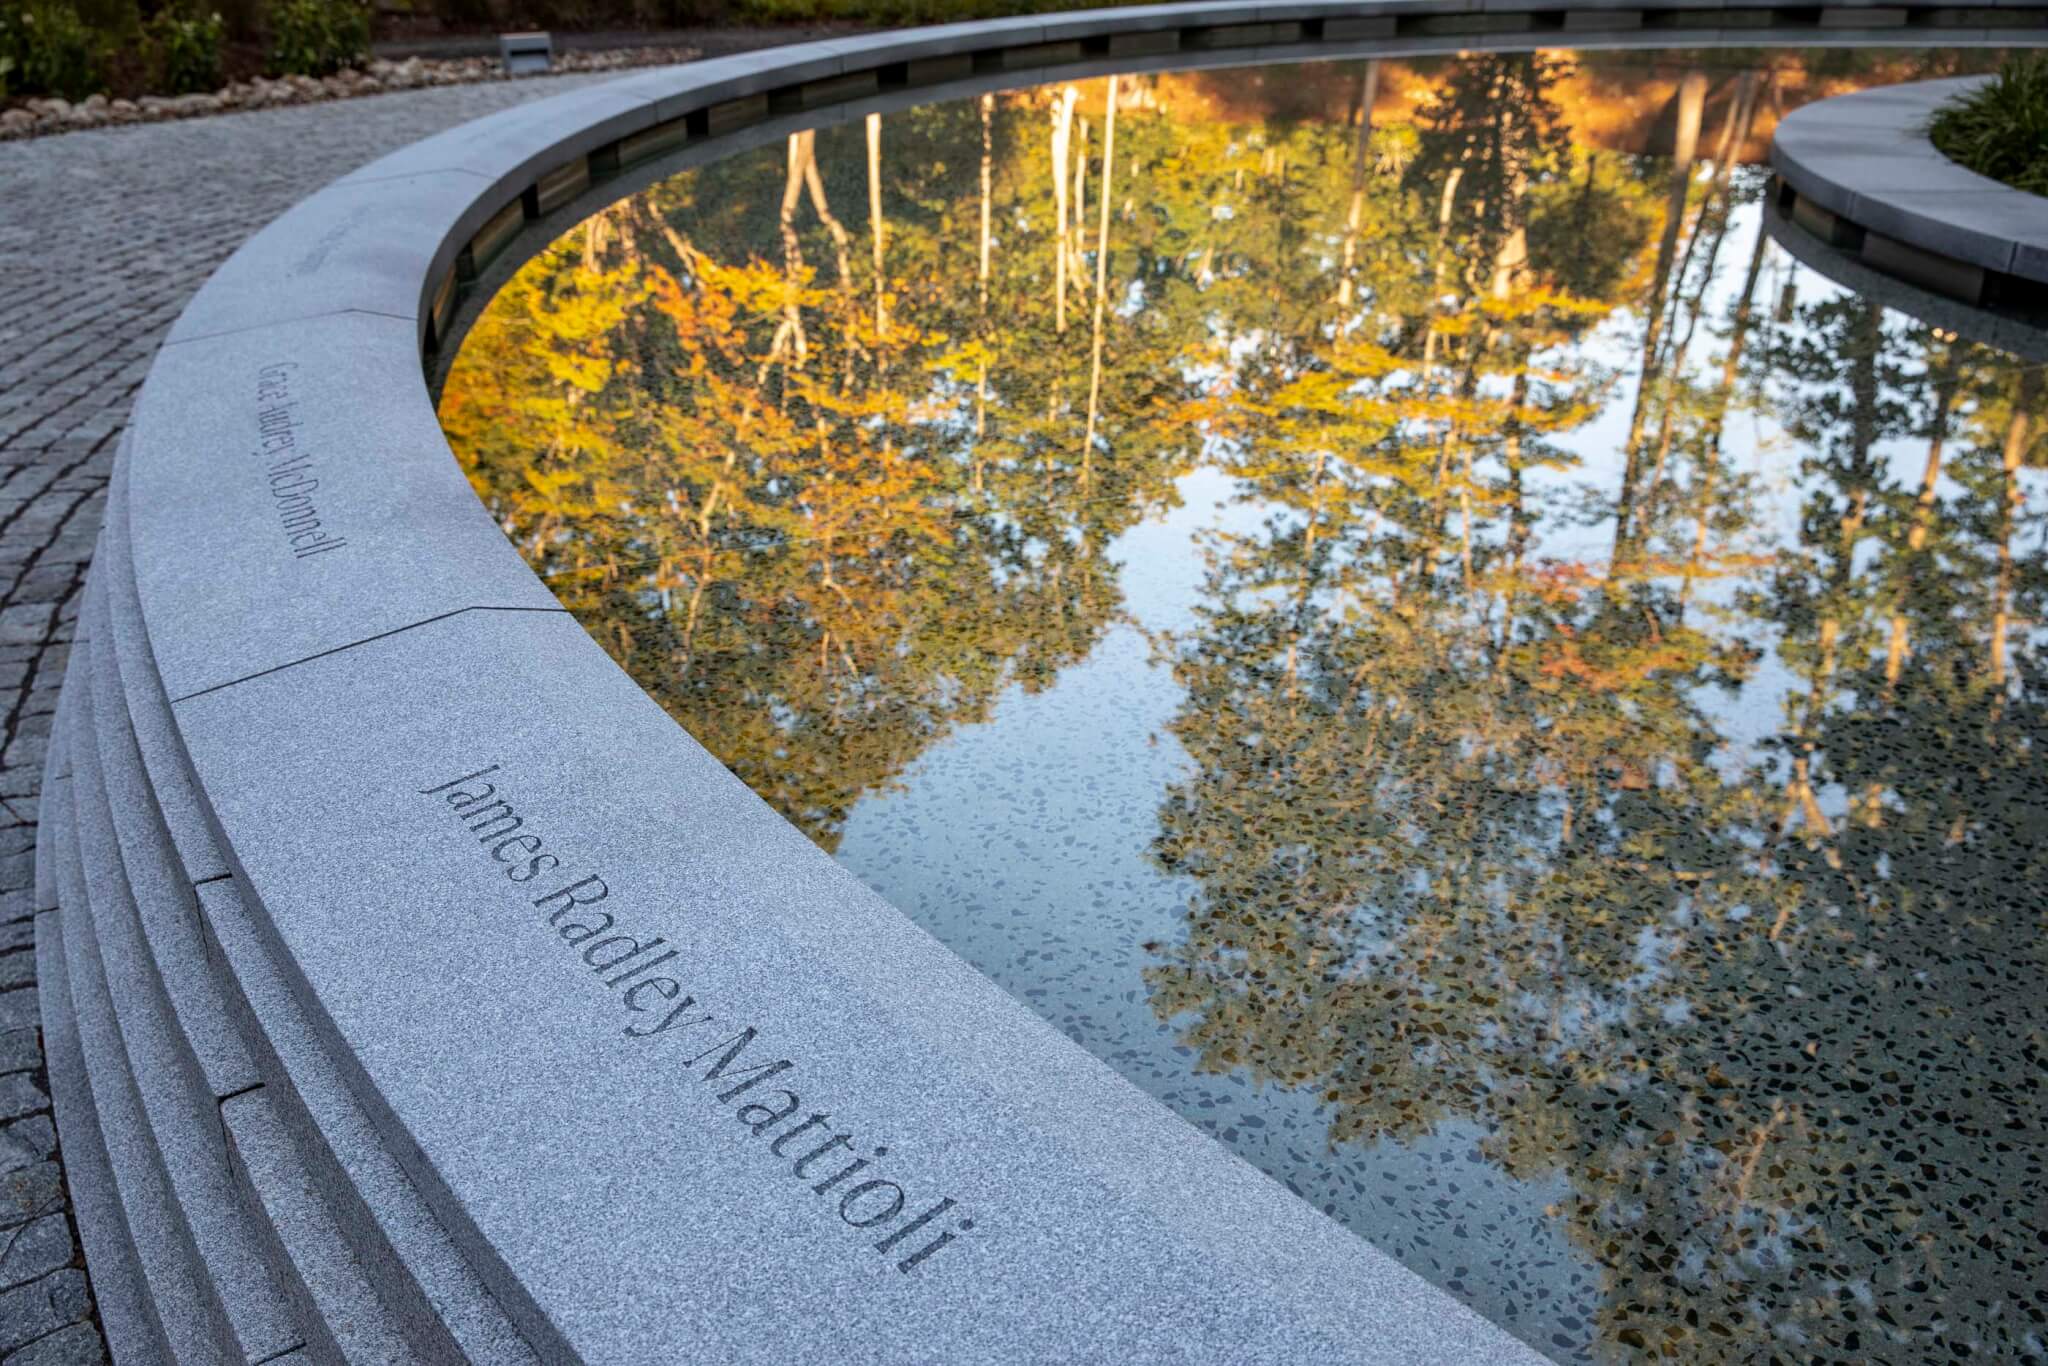 names of victims of gun violence carved into granite landscape wall